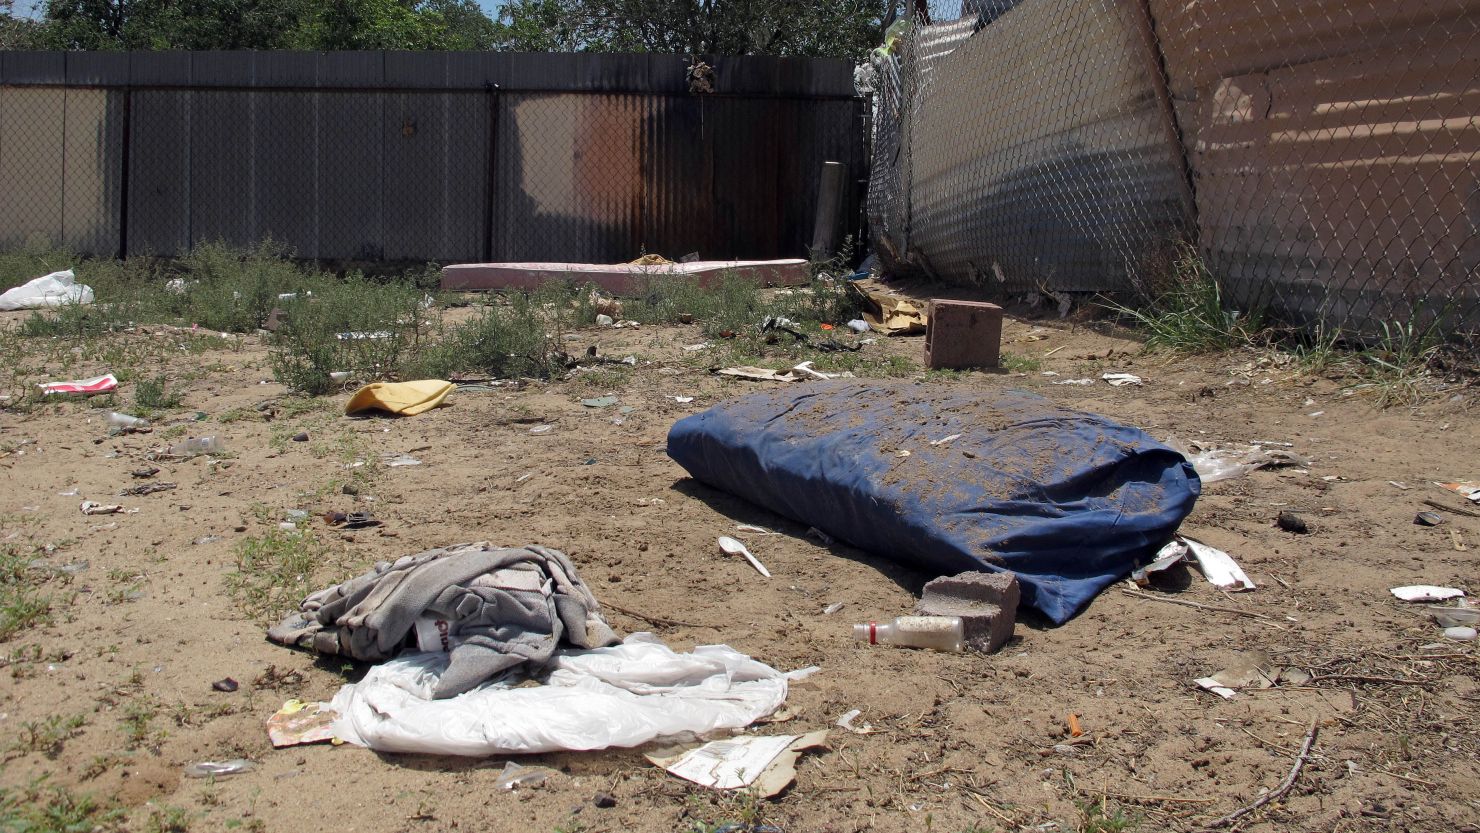 Bedding, clothing and broken glass litter a homeless encampment in Albuquerque where three teenagers are accused of fatally beating two homeless men.